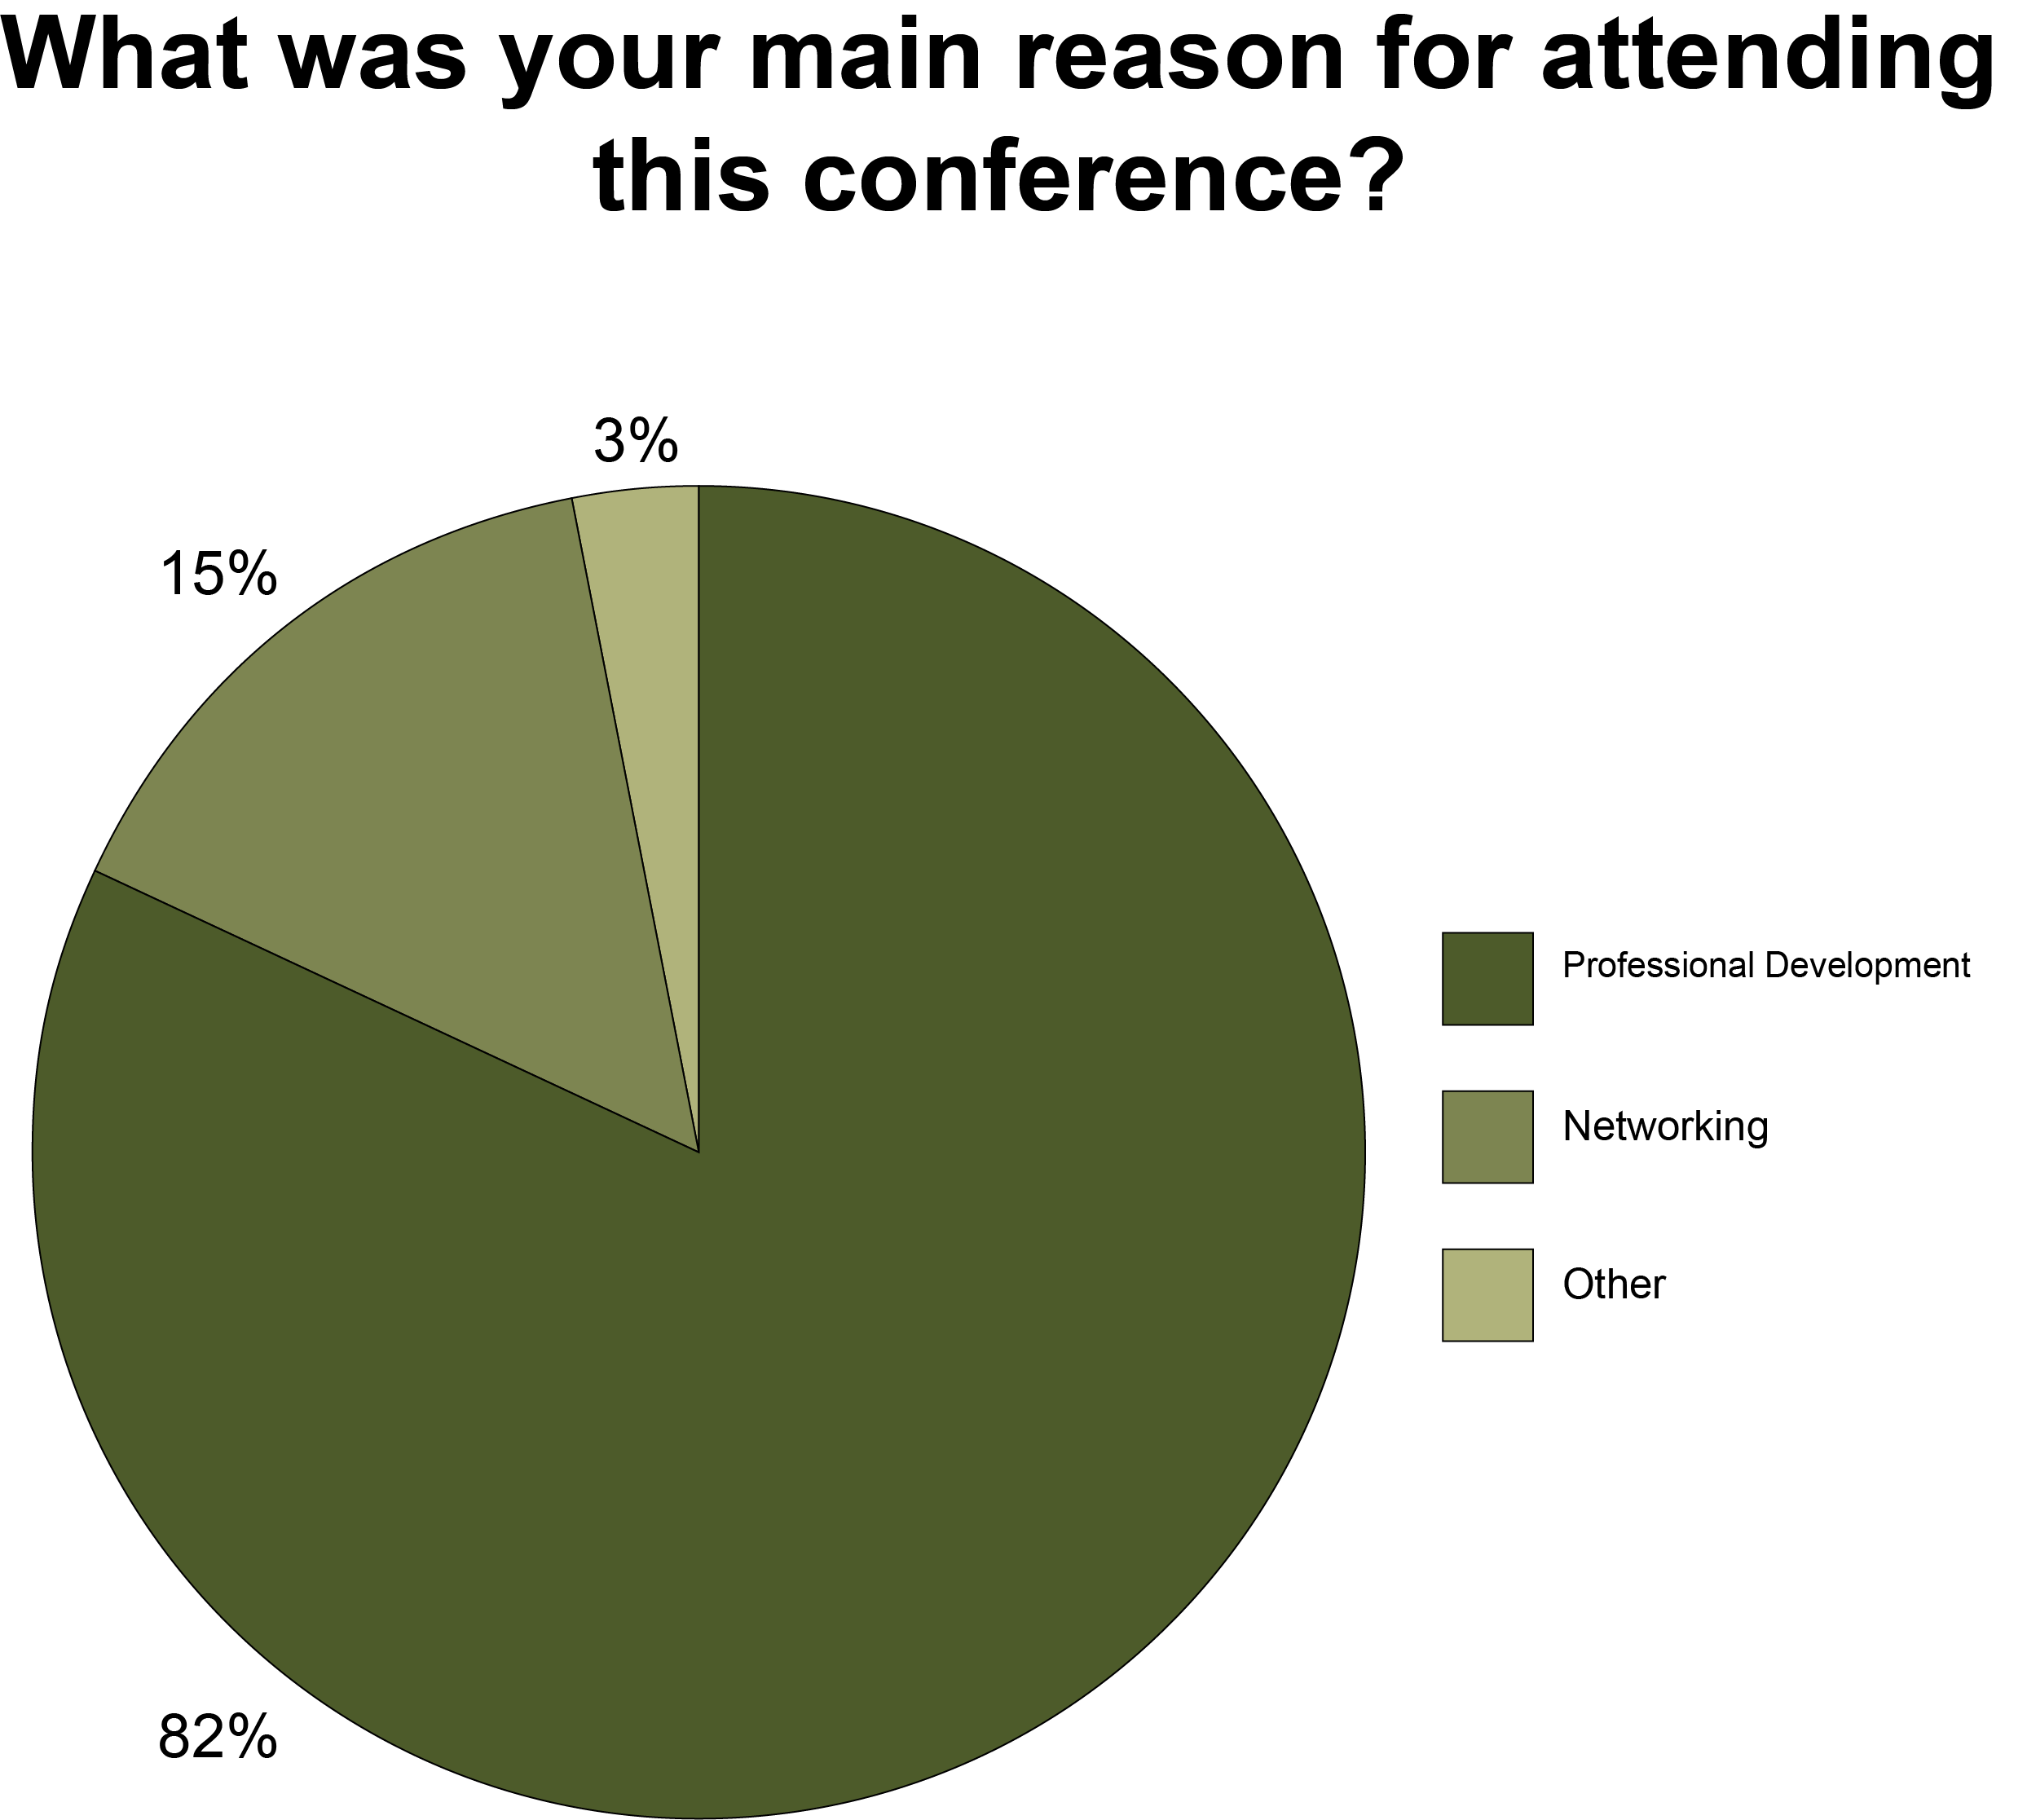 What was your main reason for attending this conference? 82% Professional Development; 15% Networking; 3% Other